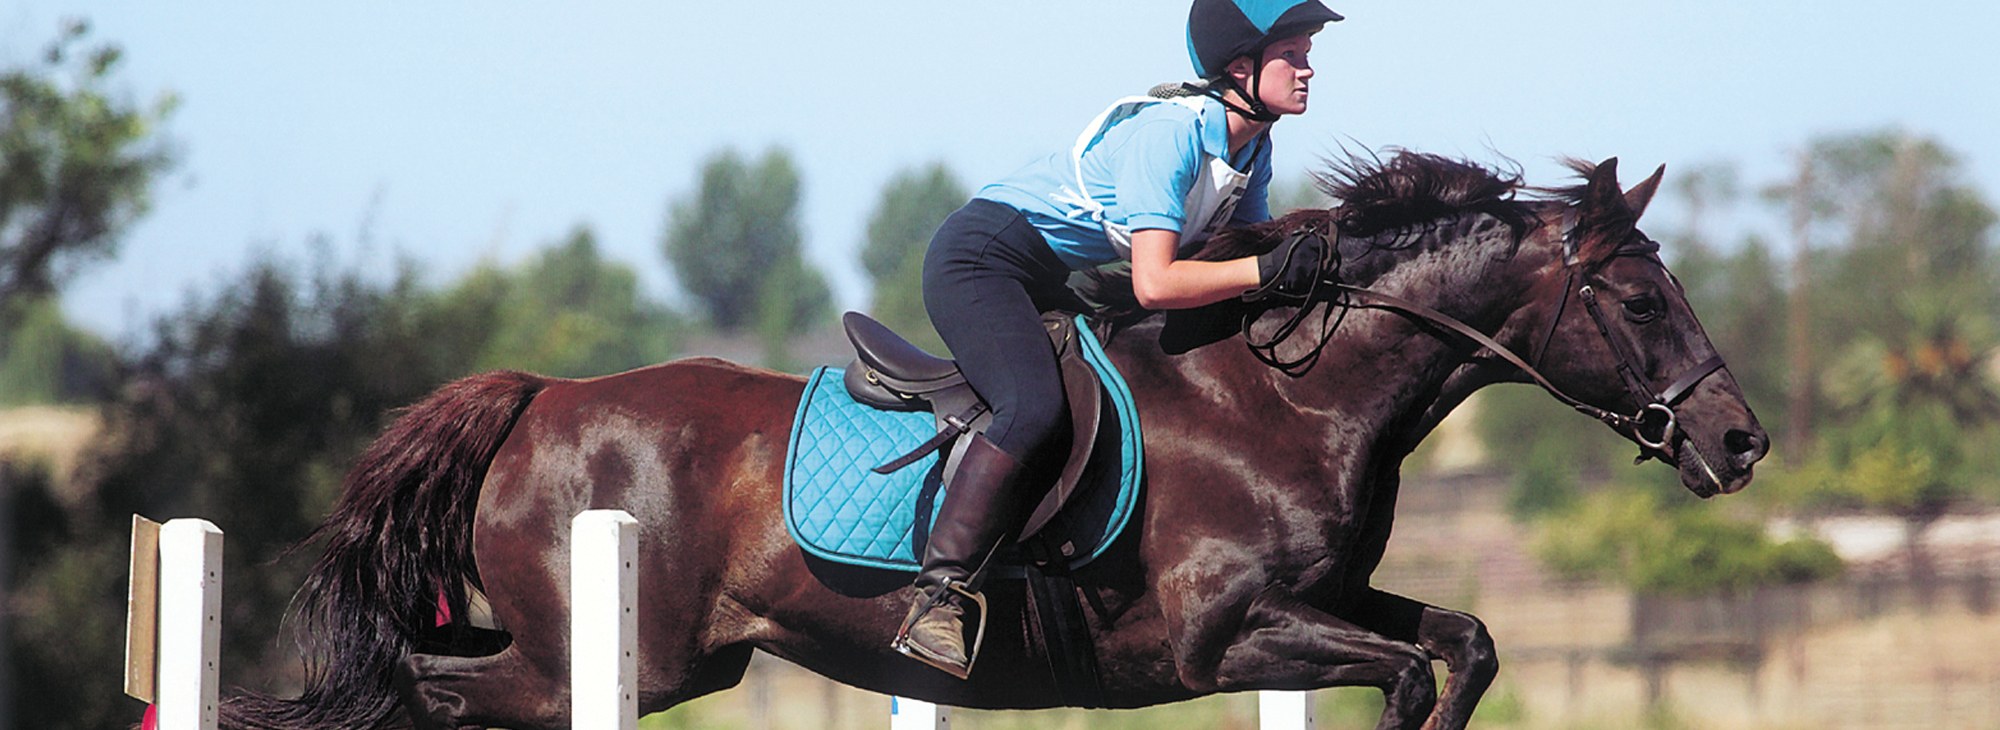 Sport Horse Eventing Photo